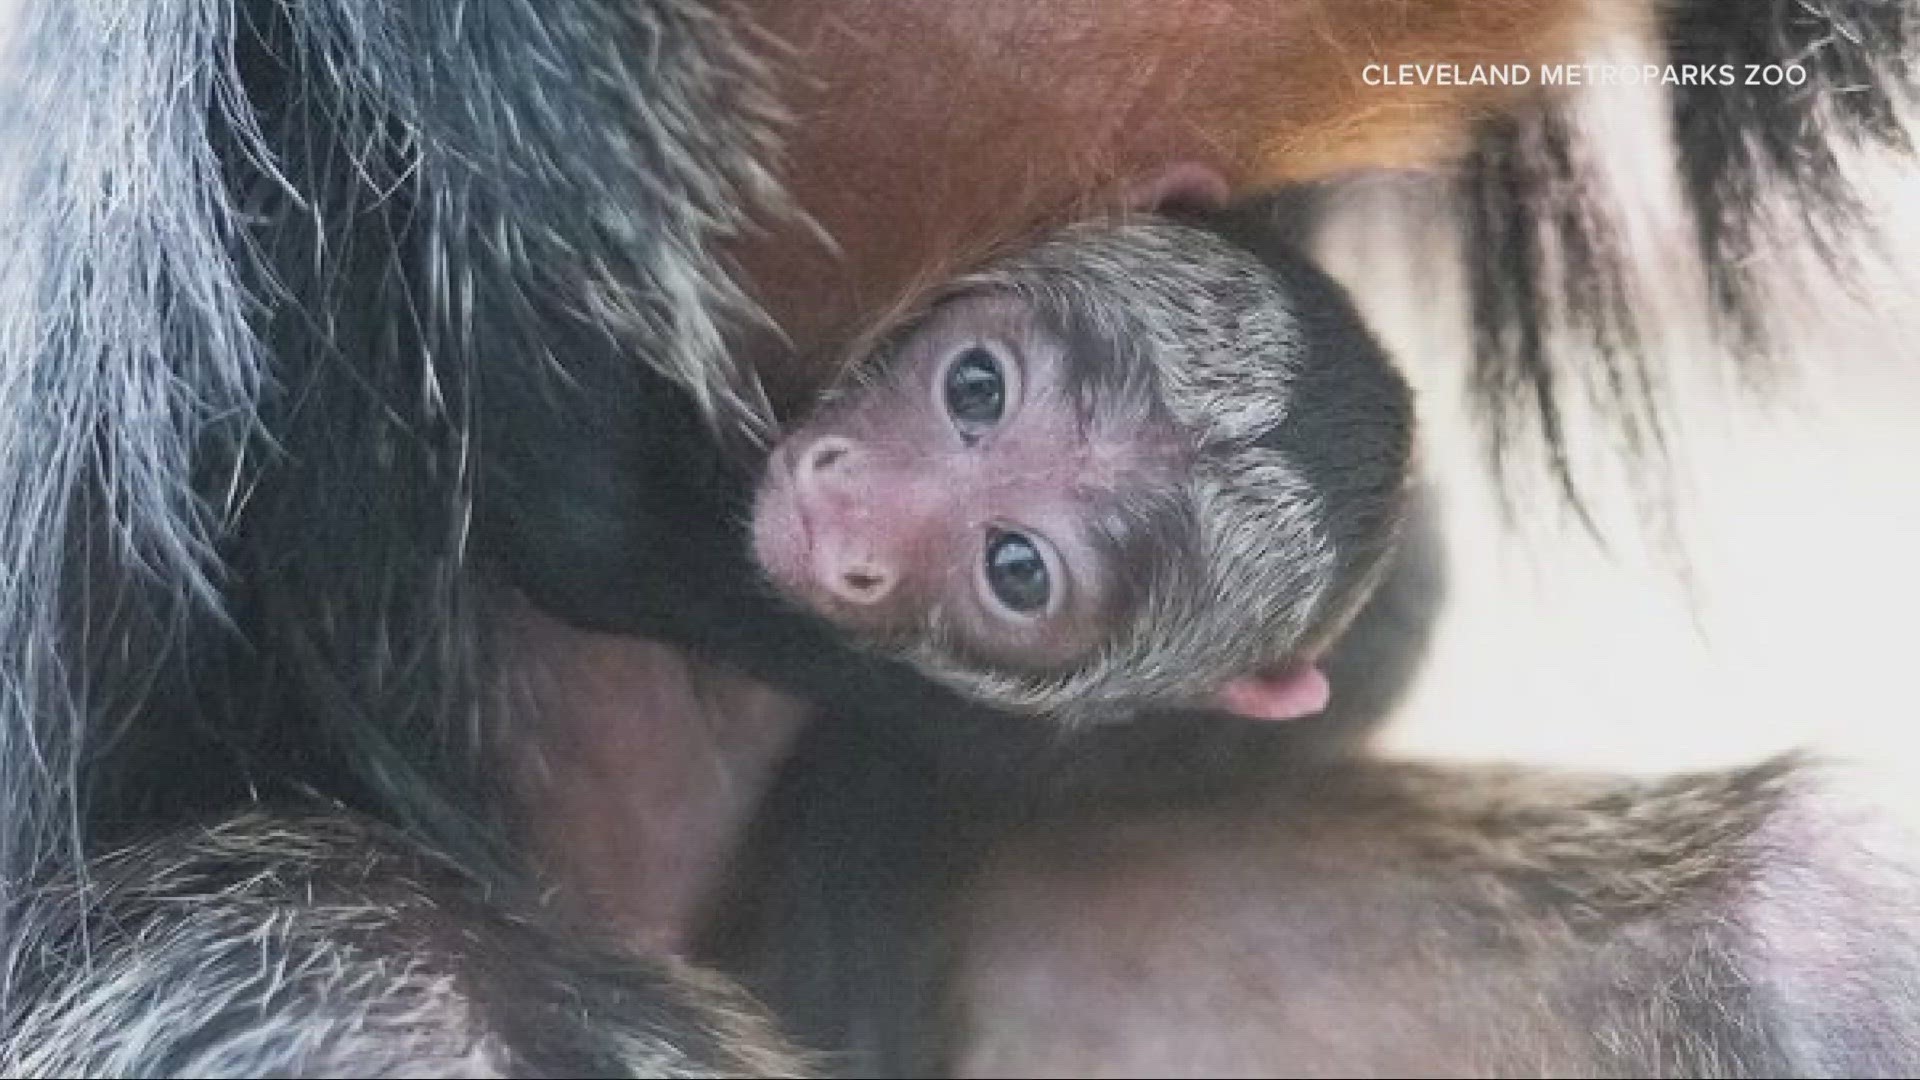 The Cleveland Metroparks Zoo announced on Facebook that a white-faced saki money was born earlier this week.